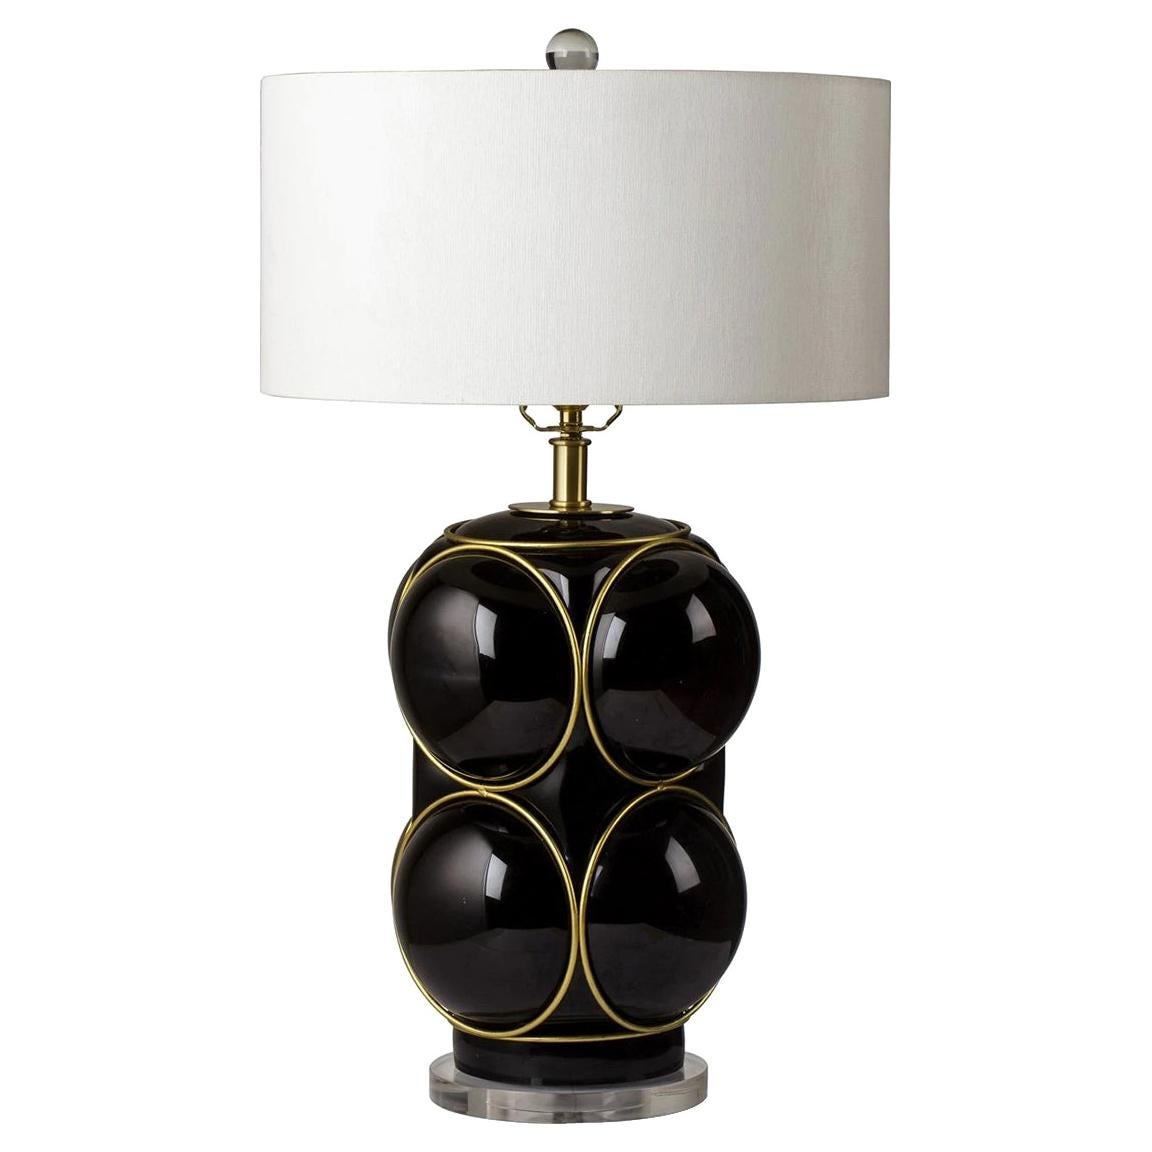 Walberg Black Table lamp For Sale